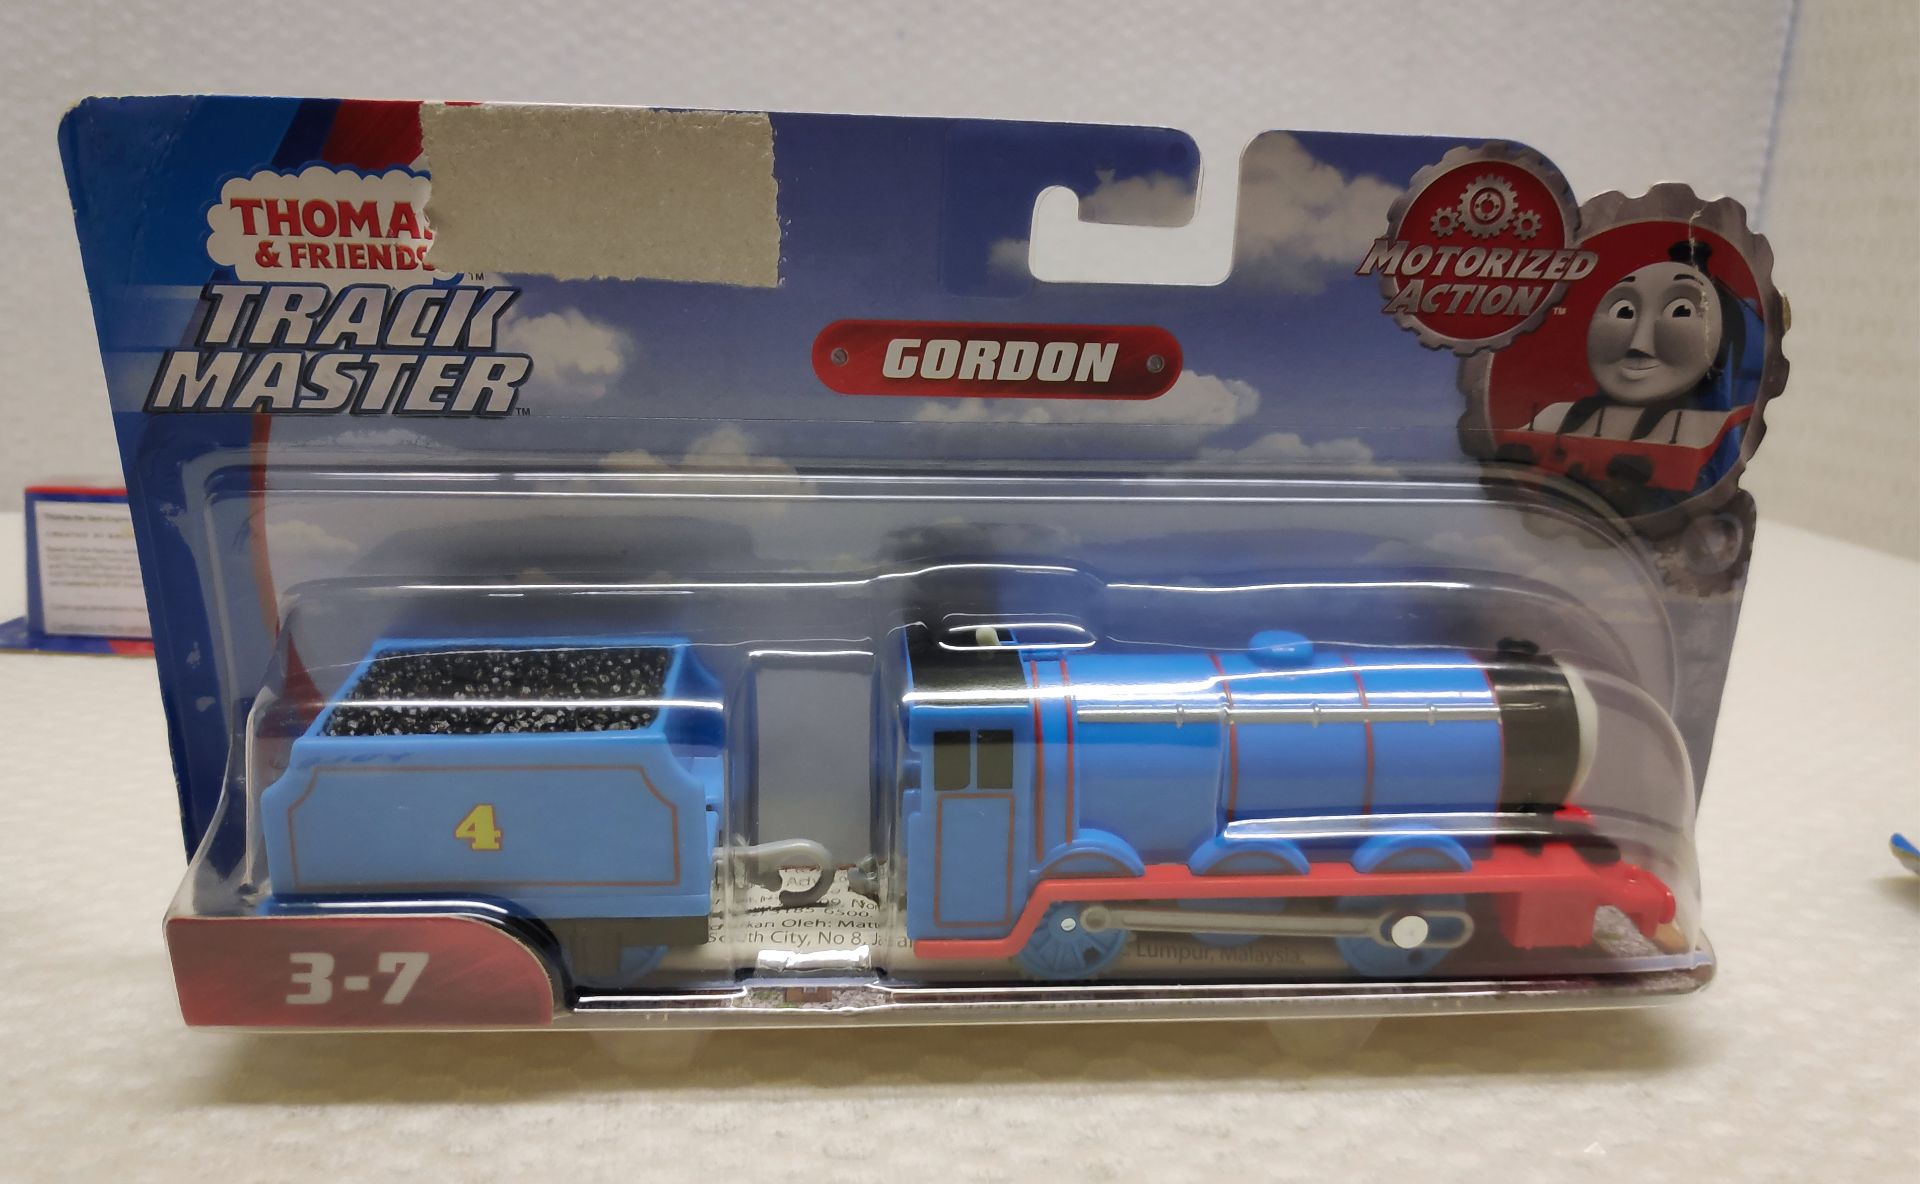 5 x Thomas & Friends Trackmaster Trains - Percy, Gordon, James, Emily and Rebecca - New/Boxed - HTYS - Image 5 of 8